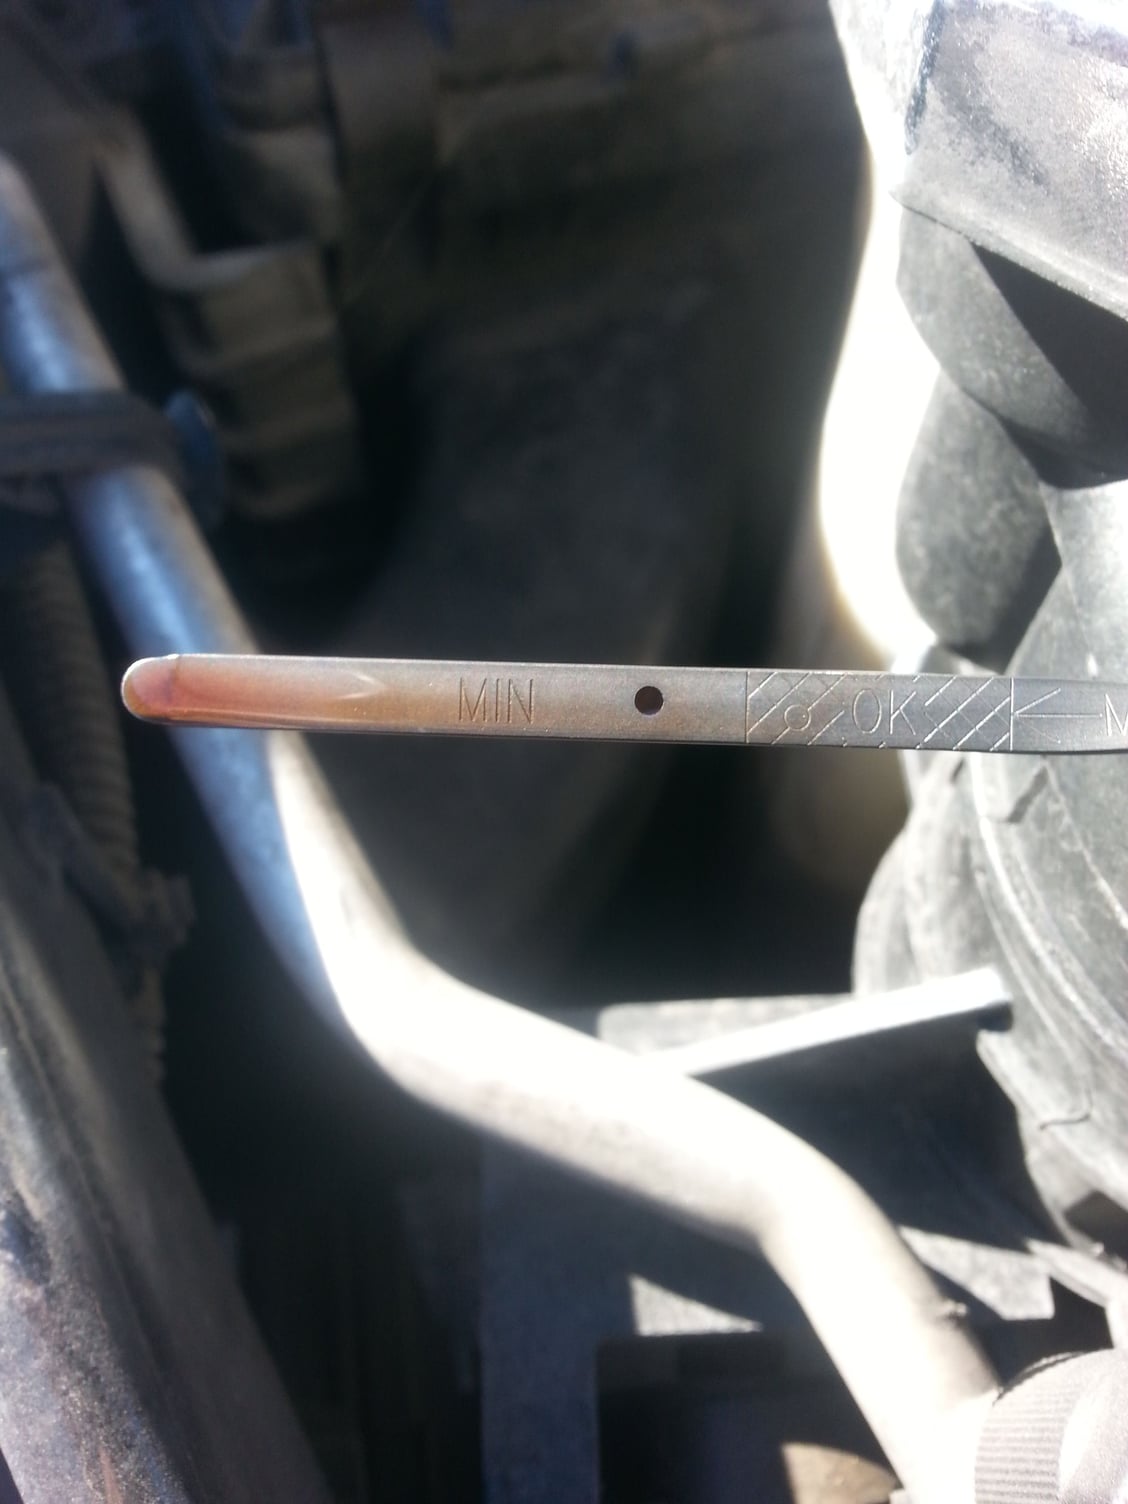 02 dodge ram 1500 5.9 front drive shaft issues after removal ...